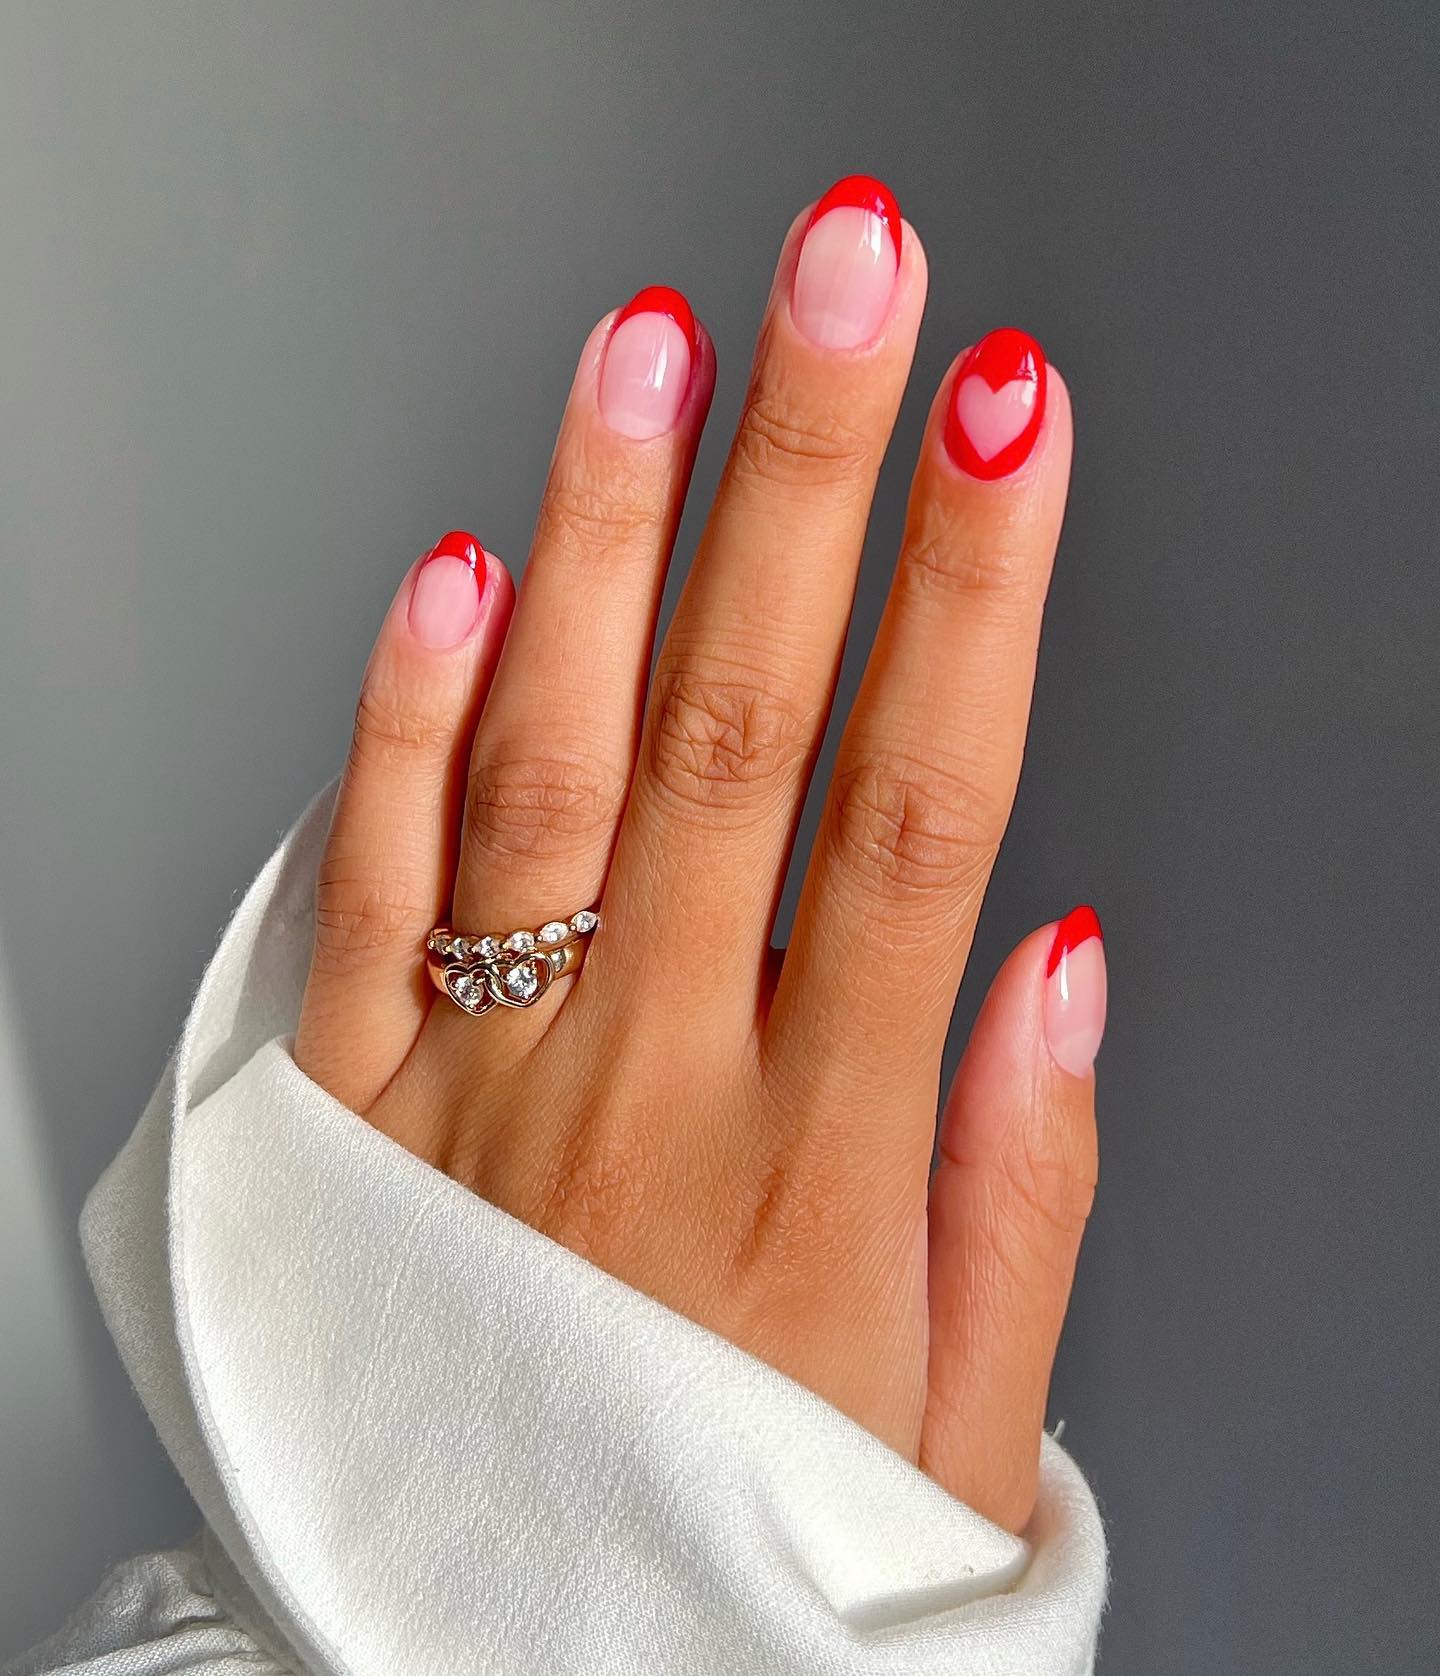 @iramshelton red French tip manicure